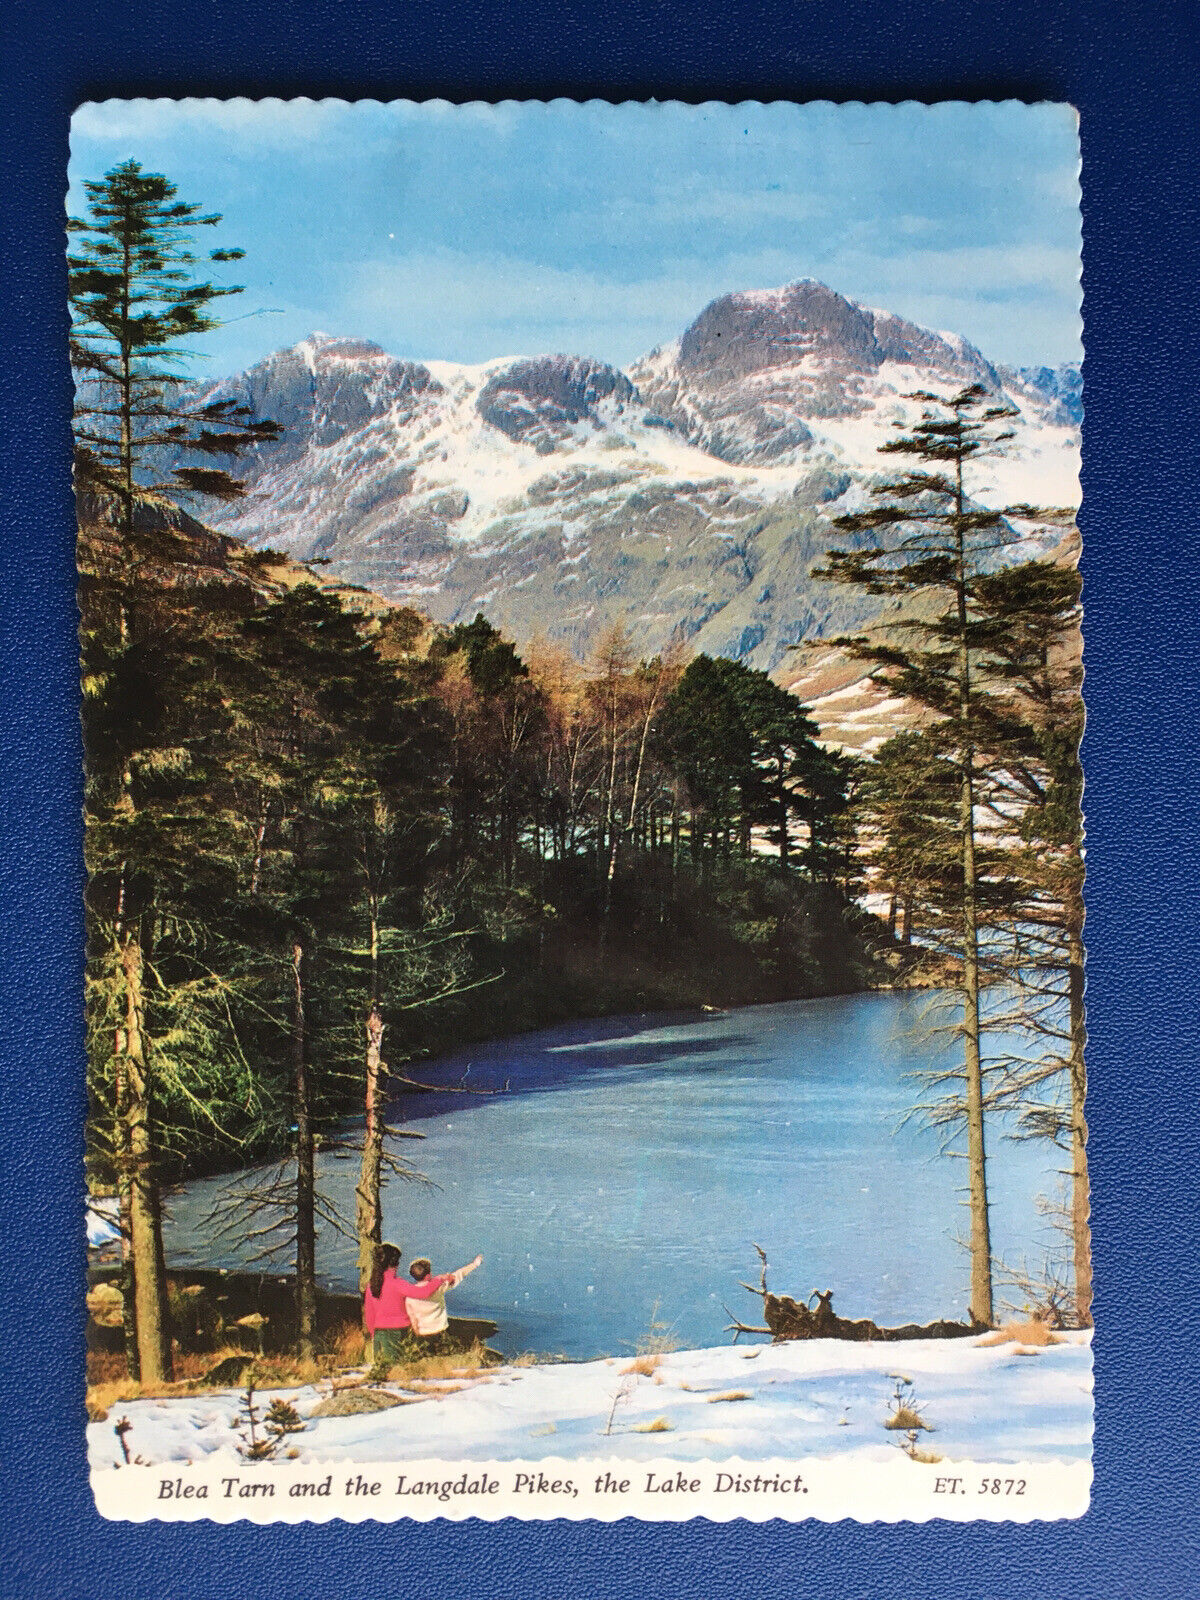 House Clearance - Blea Tarn Service - And The Langdale Pike, Lake District - Bamforth- Unposted